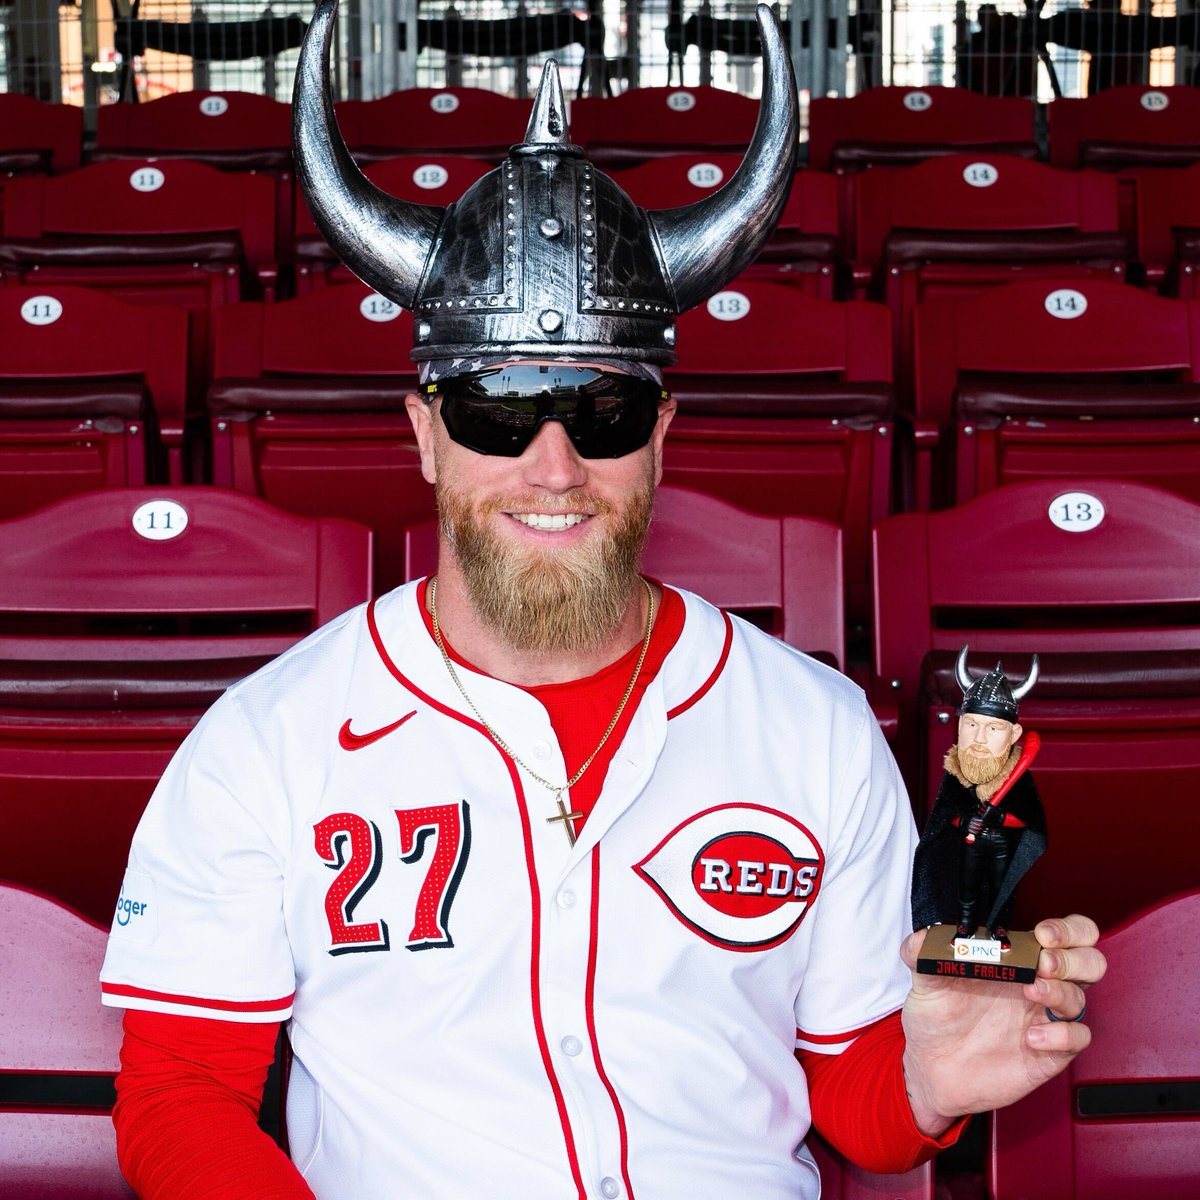 Kicking off the City Connect bobblehead series this Saturday with @jfral_23! reds.com/tickets